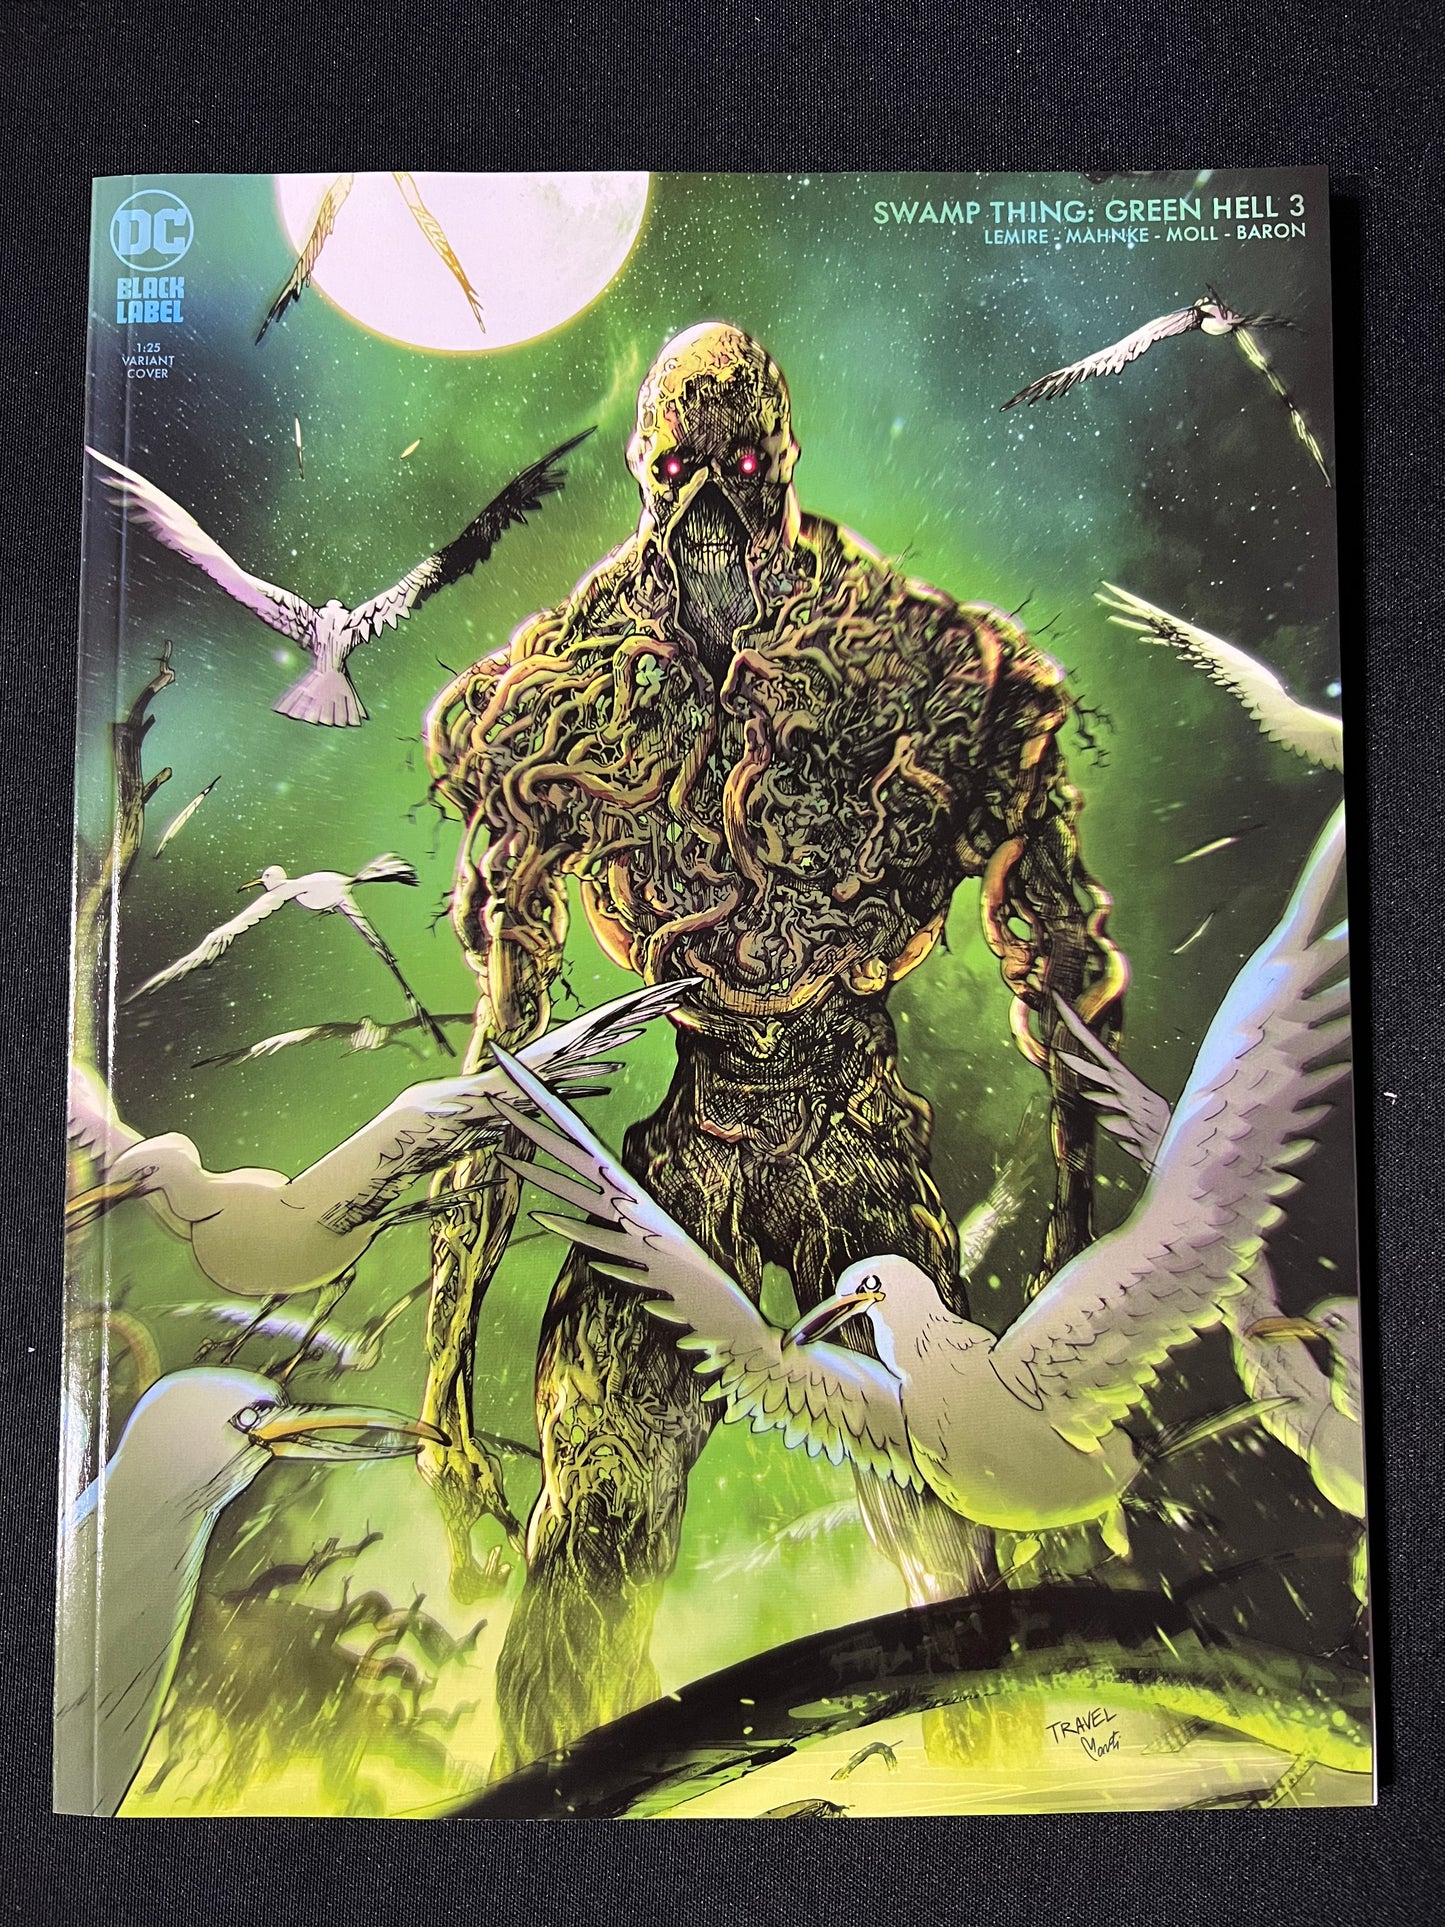 Swamp Thing Green Hell #3 1:25 Variant